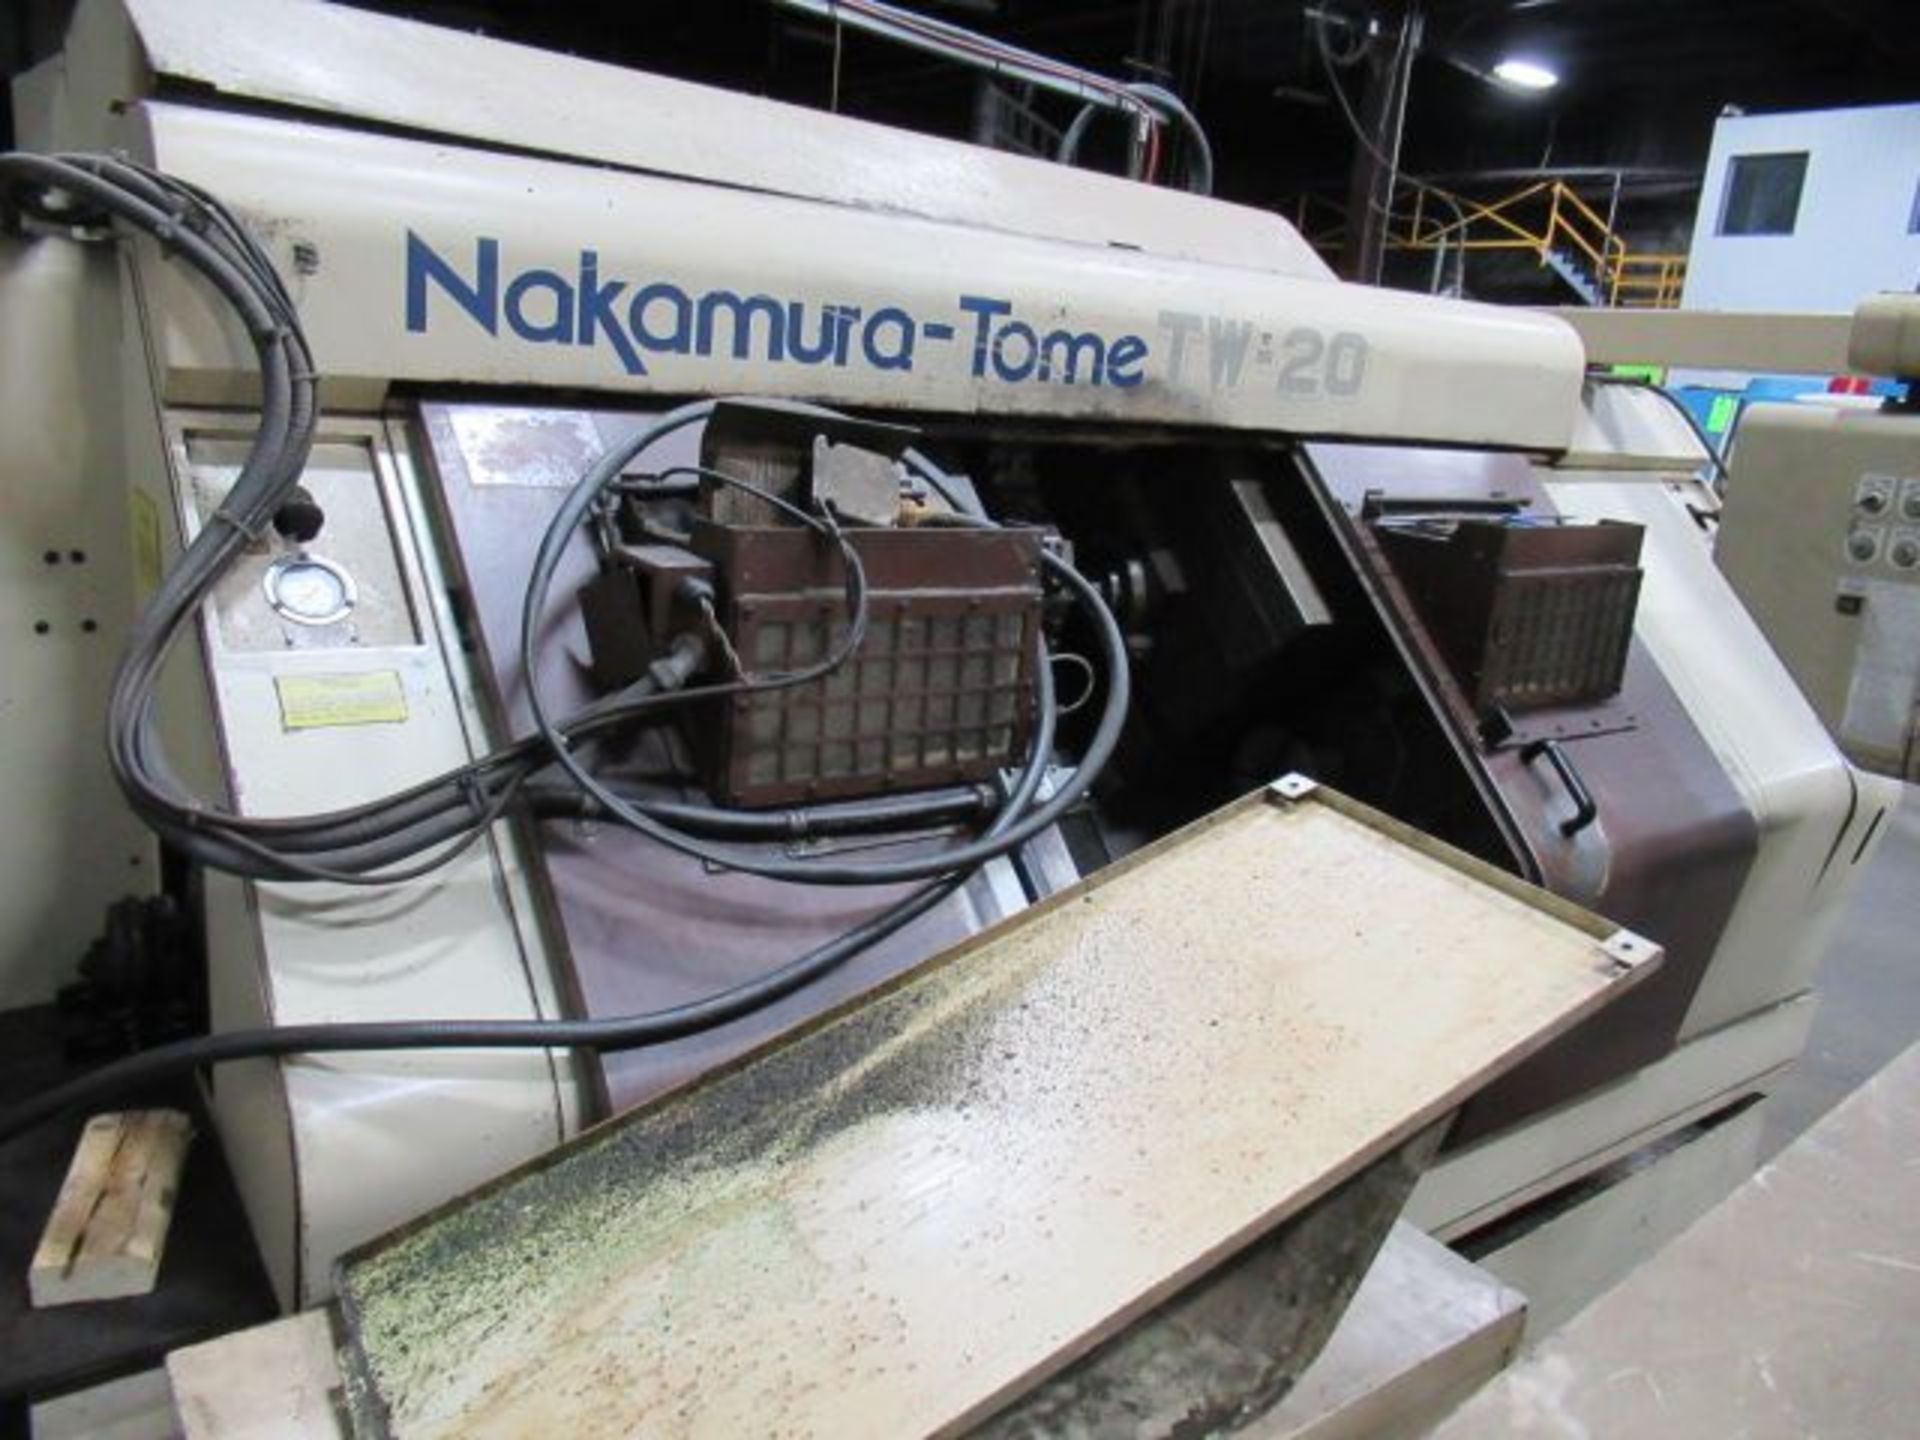 NAKAMURA TOME TW20 CNC Turning Center, M/N TW20, s/n 20206 ($1200 Rigging Cost) - Image 3 of 5